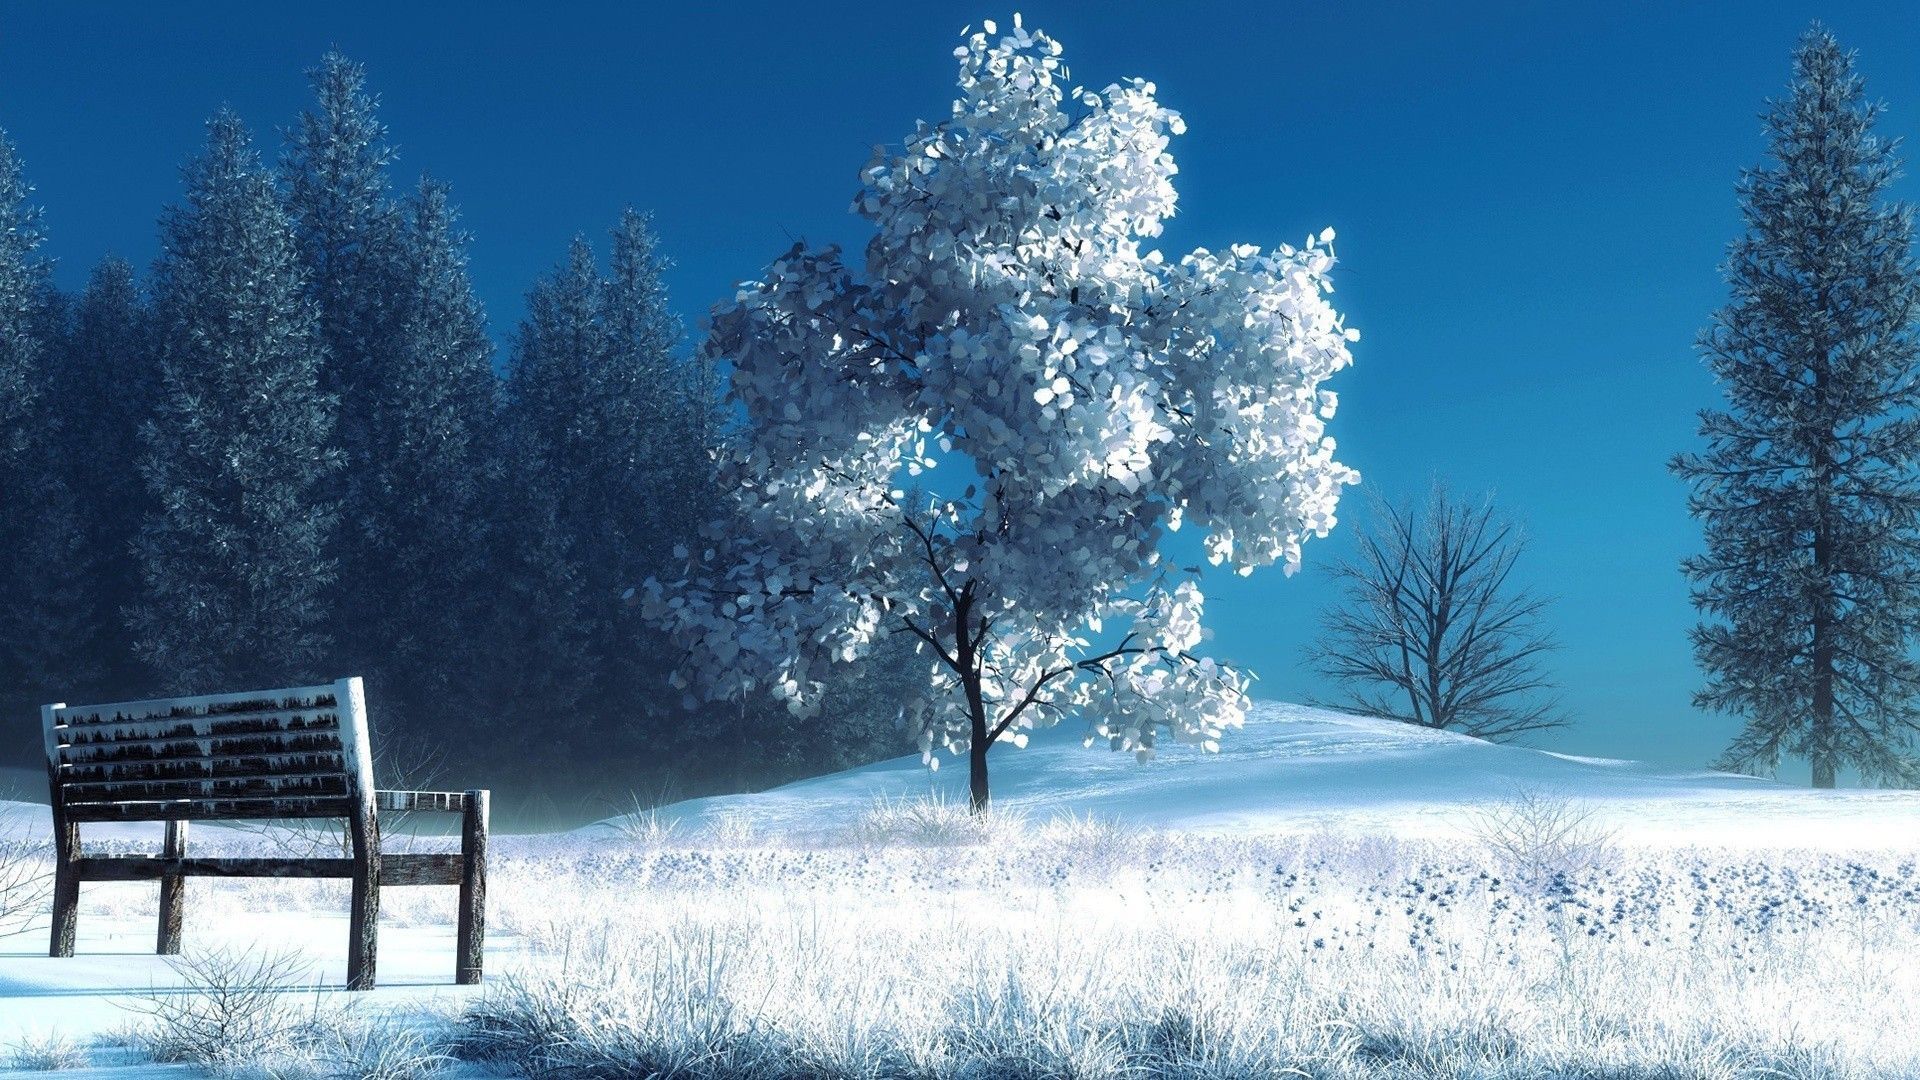 Download Anime Winter Scenery Wallpaper 10 HD Wallpaper 1080p And Share It With More People. Ideias De Paisagismo, Wallpaper Natureza, Lindas Paisagens